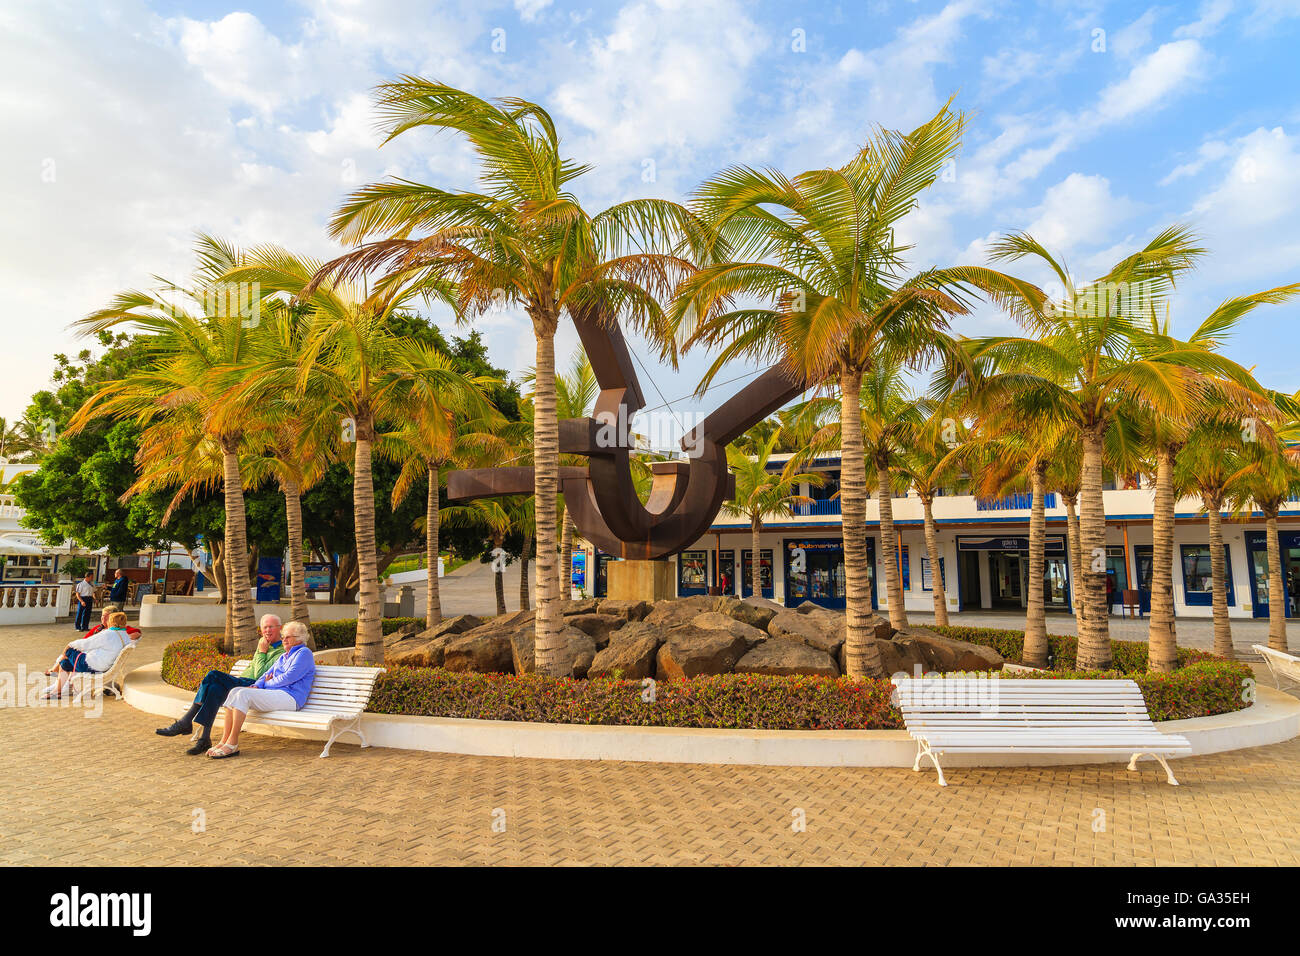 PUERTO CALERO MARINA, LANZAROTE ISLAND - JAN 12, 2015: square with palm trees and people sitting on bench in Puerto Calero port built in Caribbean style. This is a modern yacht marina. Stock Photo